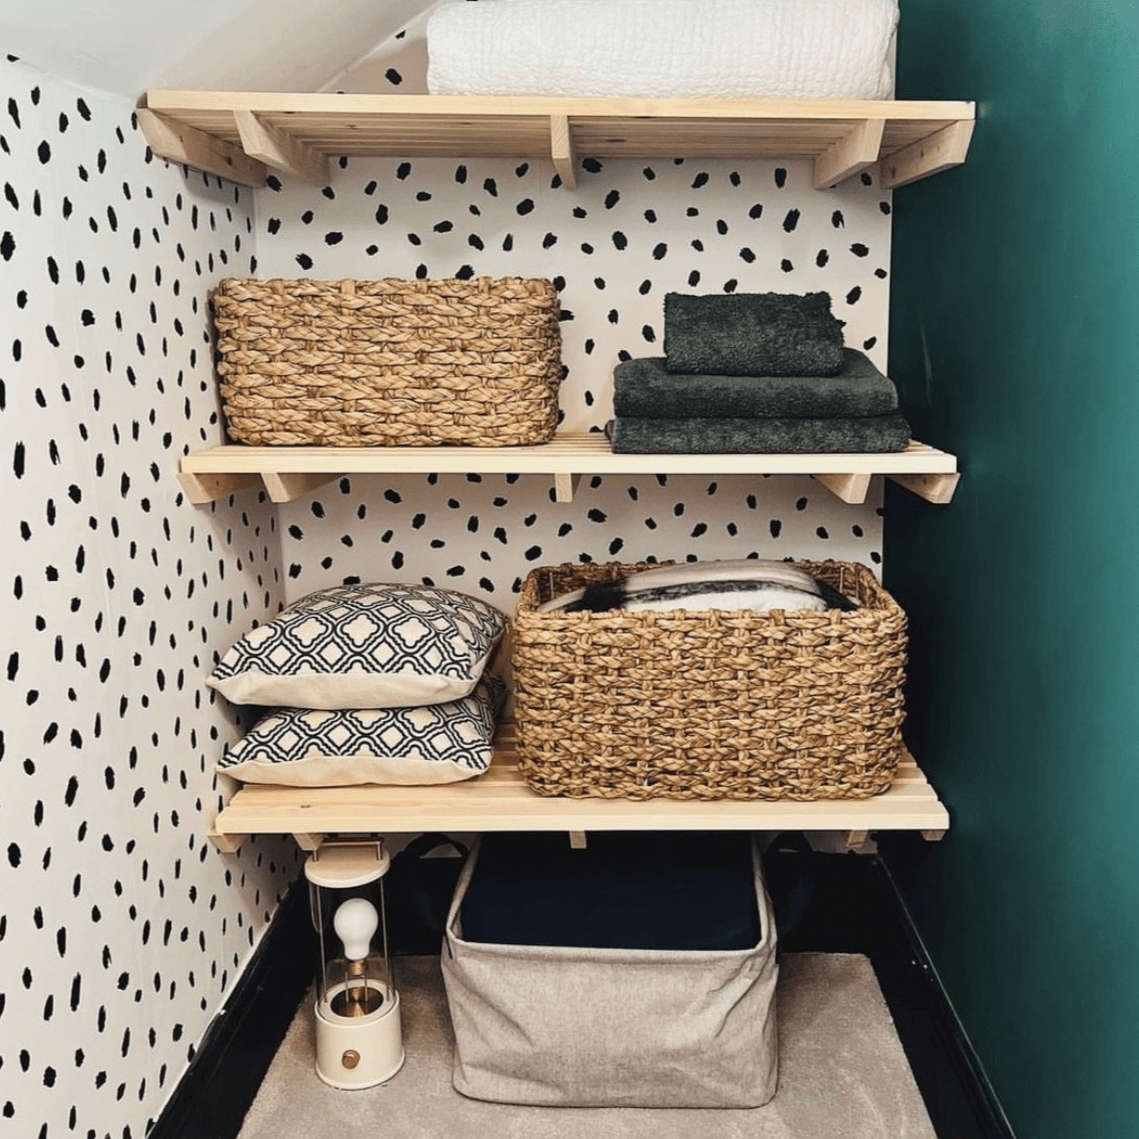 Airing Cupboard Wooden Slatted Shelves - 84 cm by 68 cm